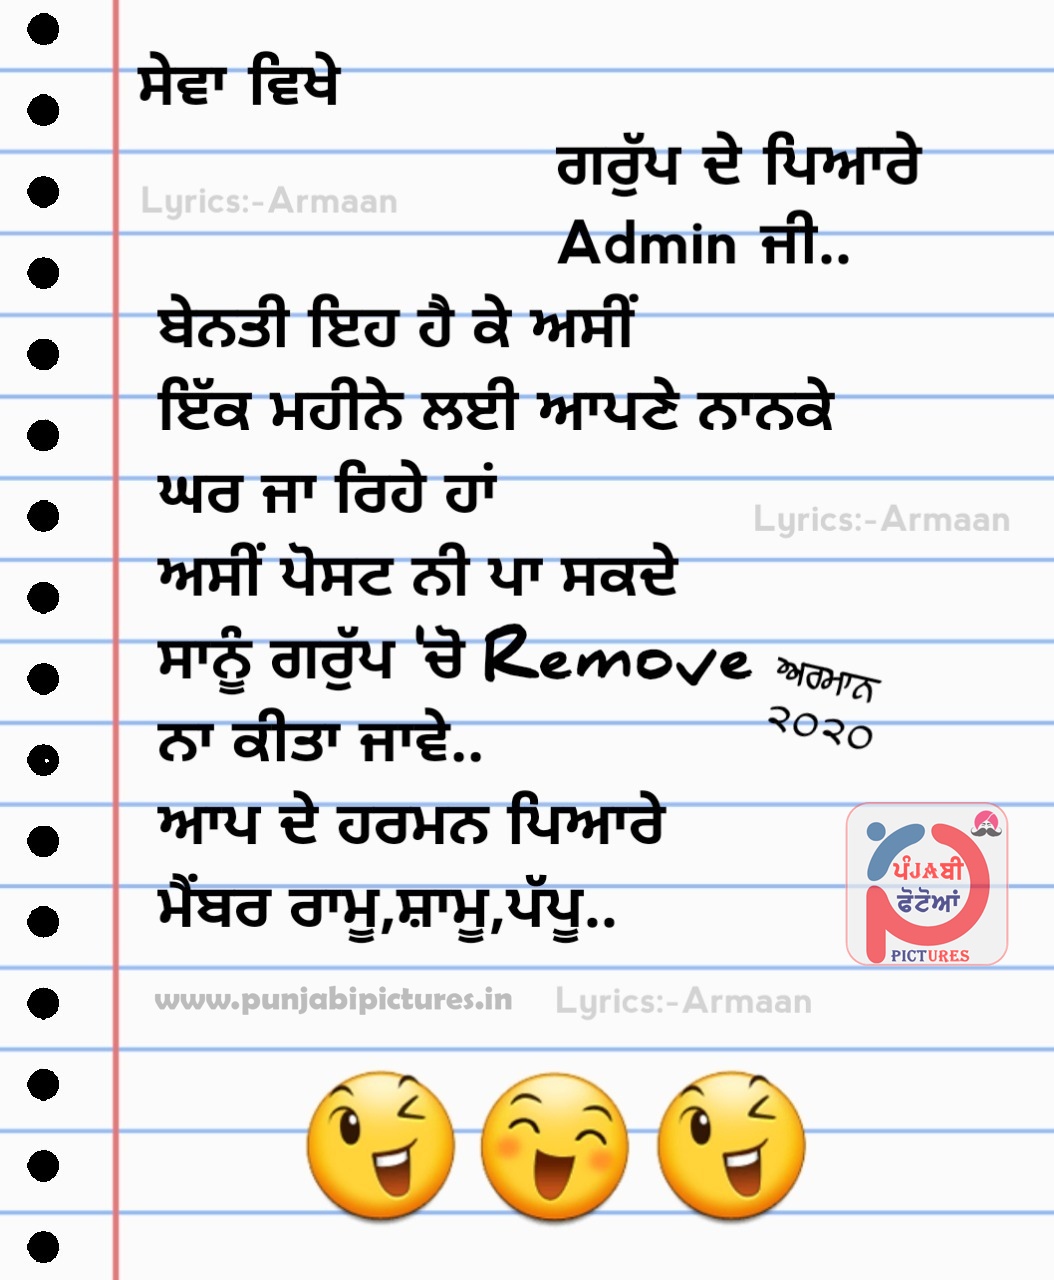 Funny Images - Whatsapp Group WhatsApp Pictures Pictures for Whatsapp  Facebook - Punjabi Pictures